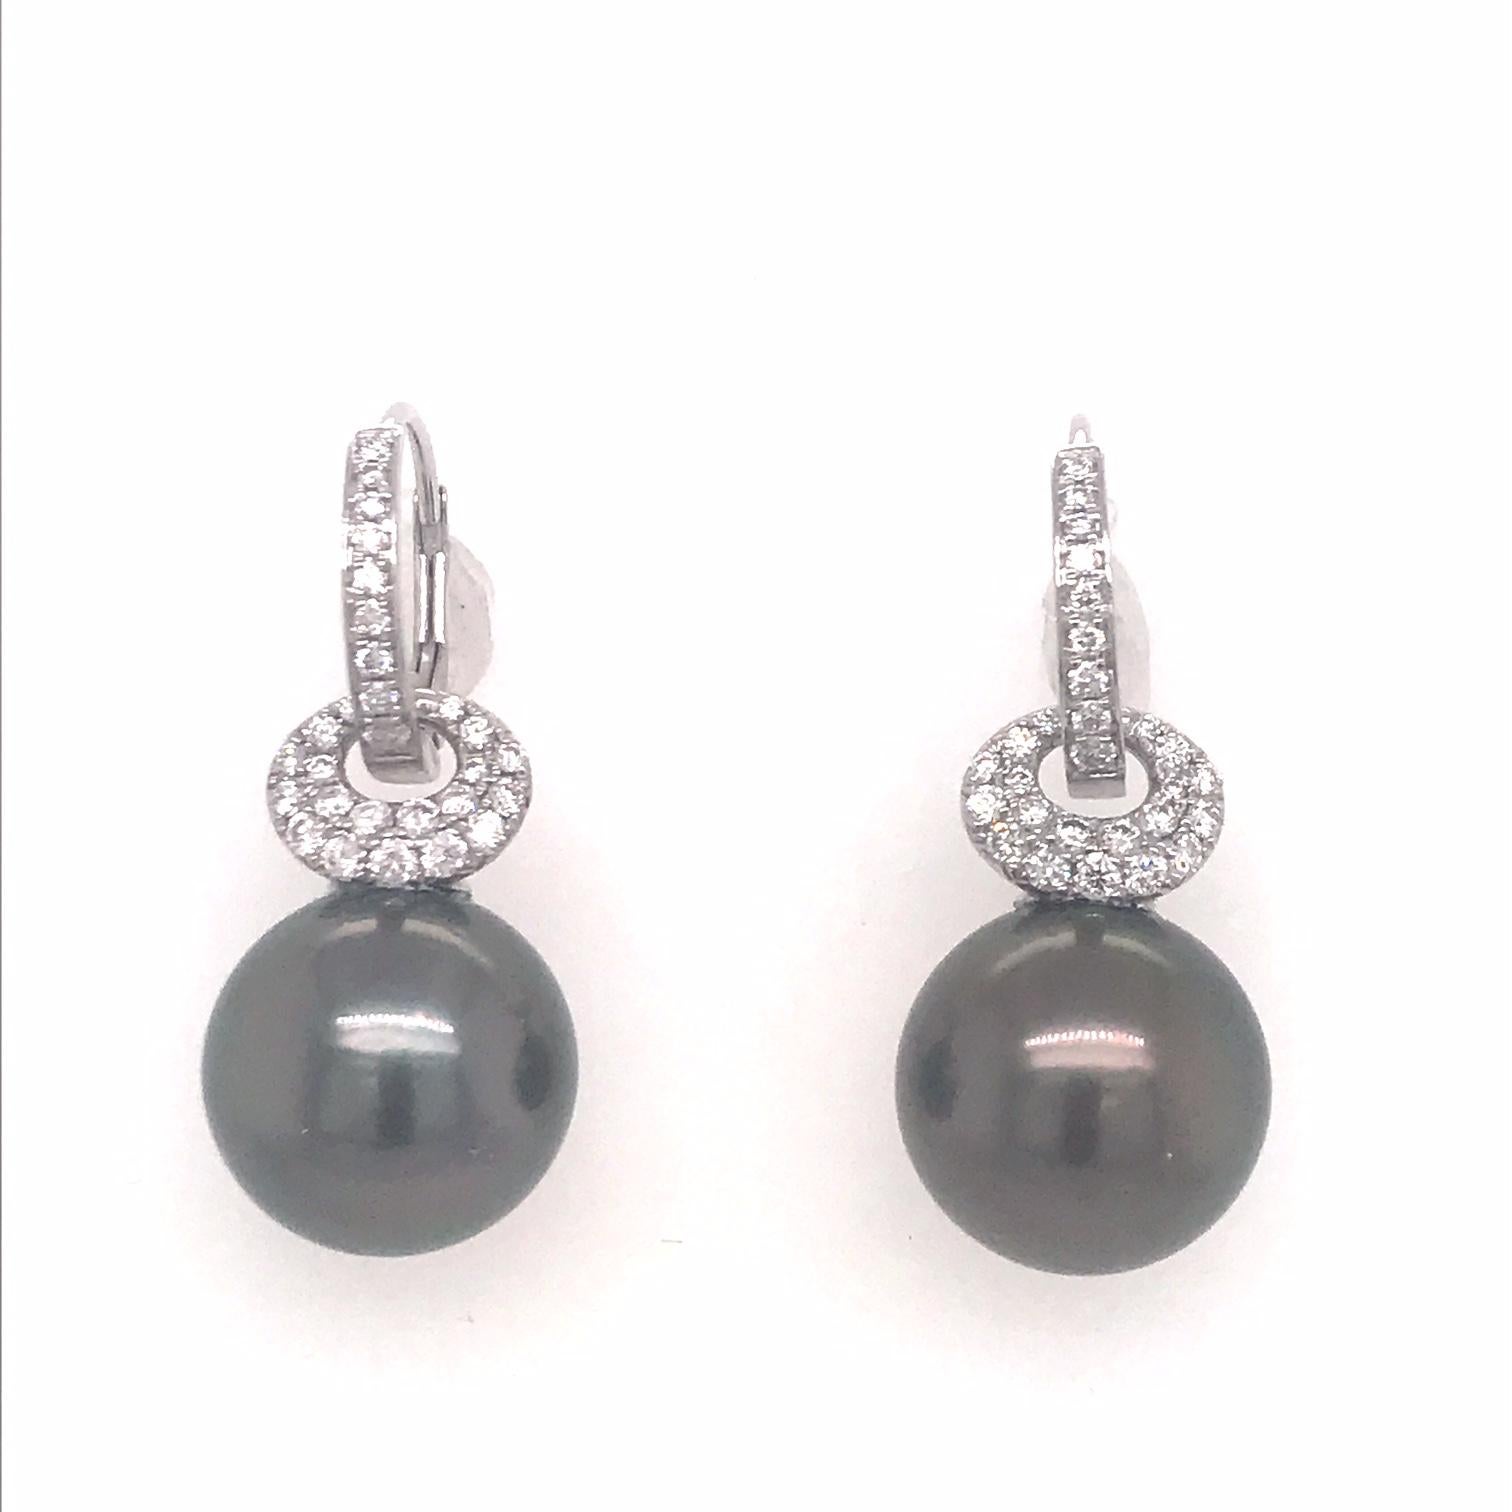 18K White gold drop earrings featuring two grey Tahitian Pearls measuring 12-13 mm with 56 round brilliants weighing 0.57 carats.
Color G-H
Clarity SI

Pearls can be changed White, Pink or Golden Pearls upon request. 

Diamond Height: 11/16